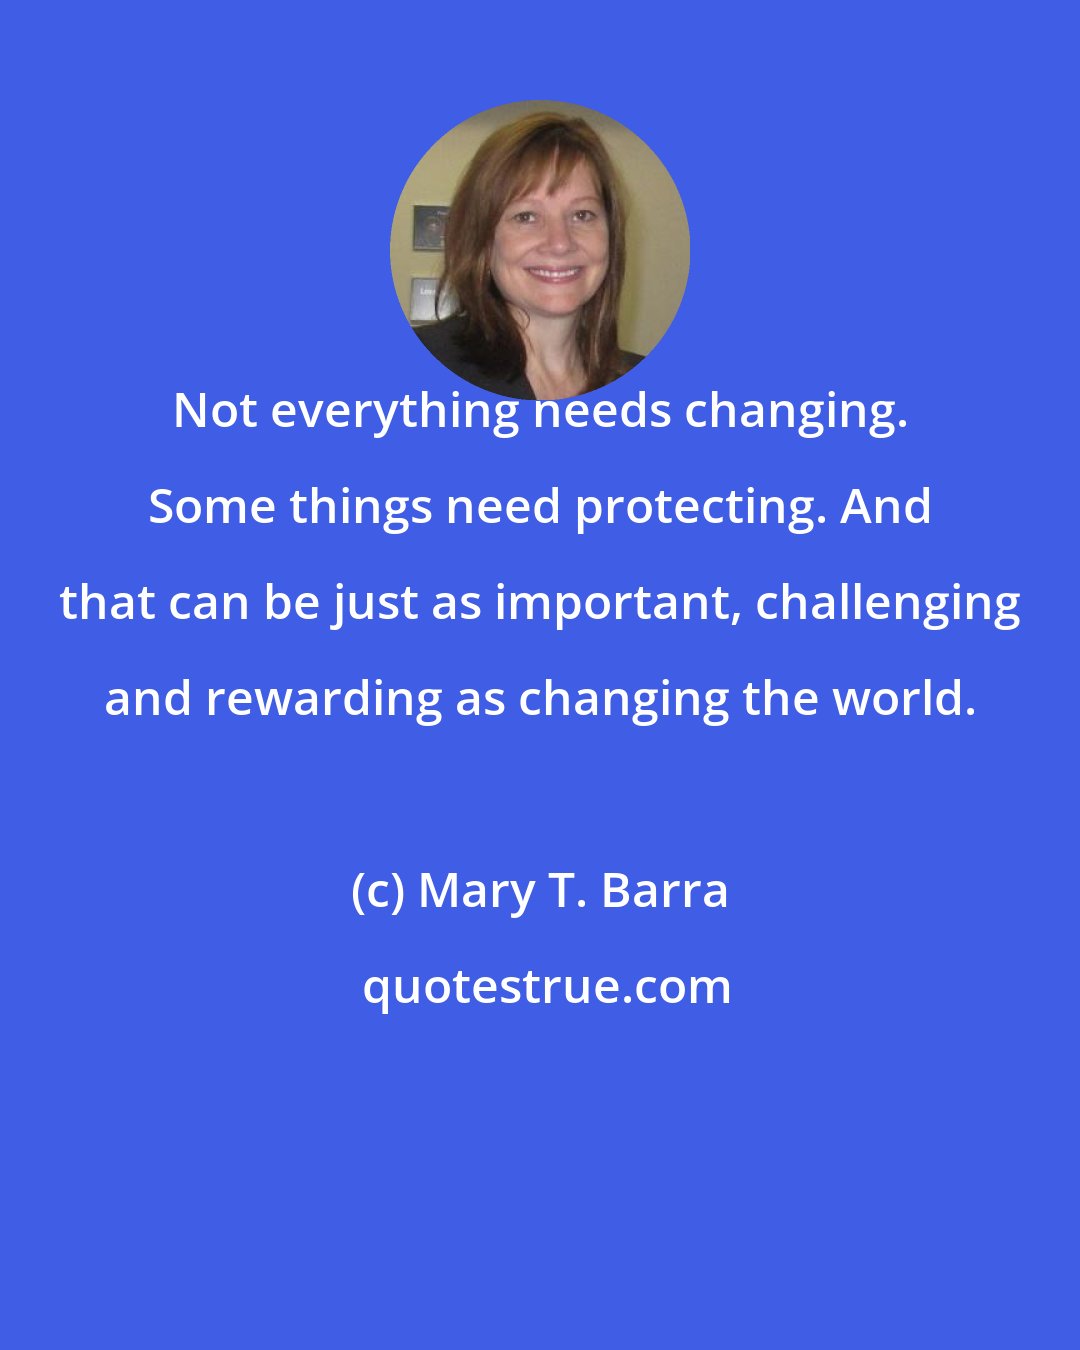 Mary T. Barra: Not everything needs changing. Some things need protecting. And that can be just as important, challenging and rewarding as changing the world.